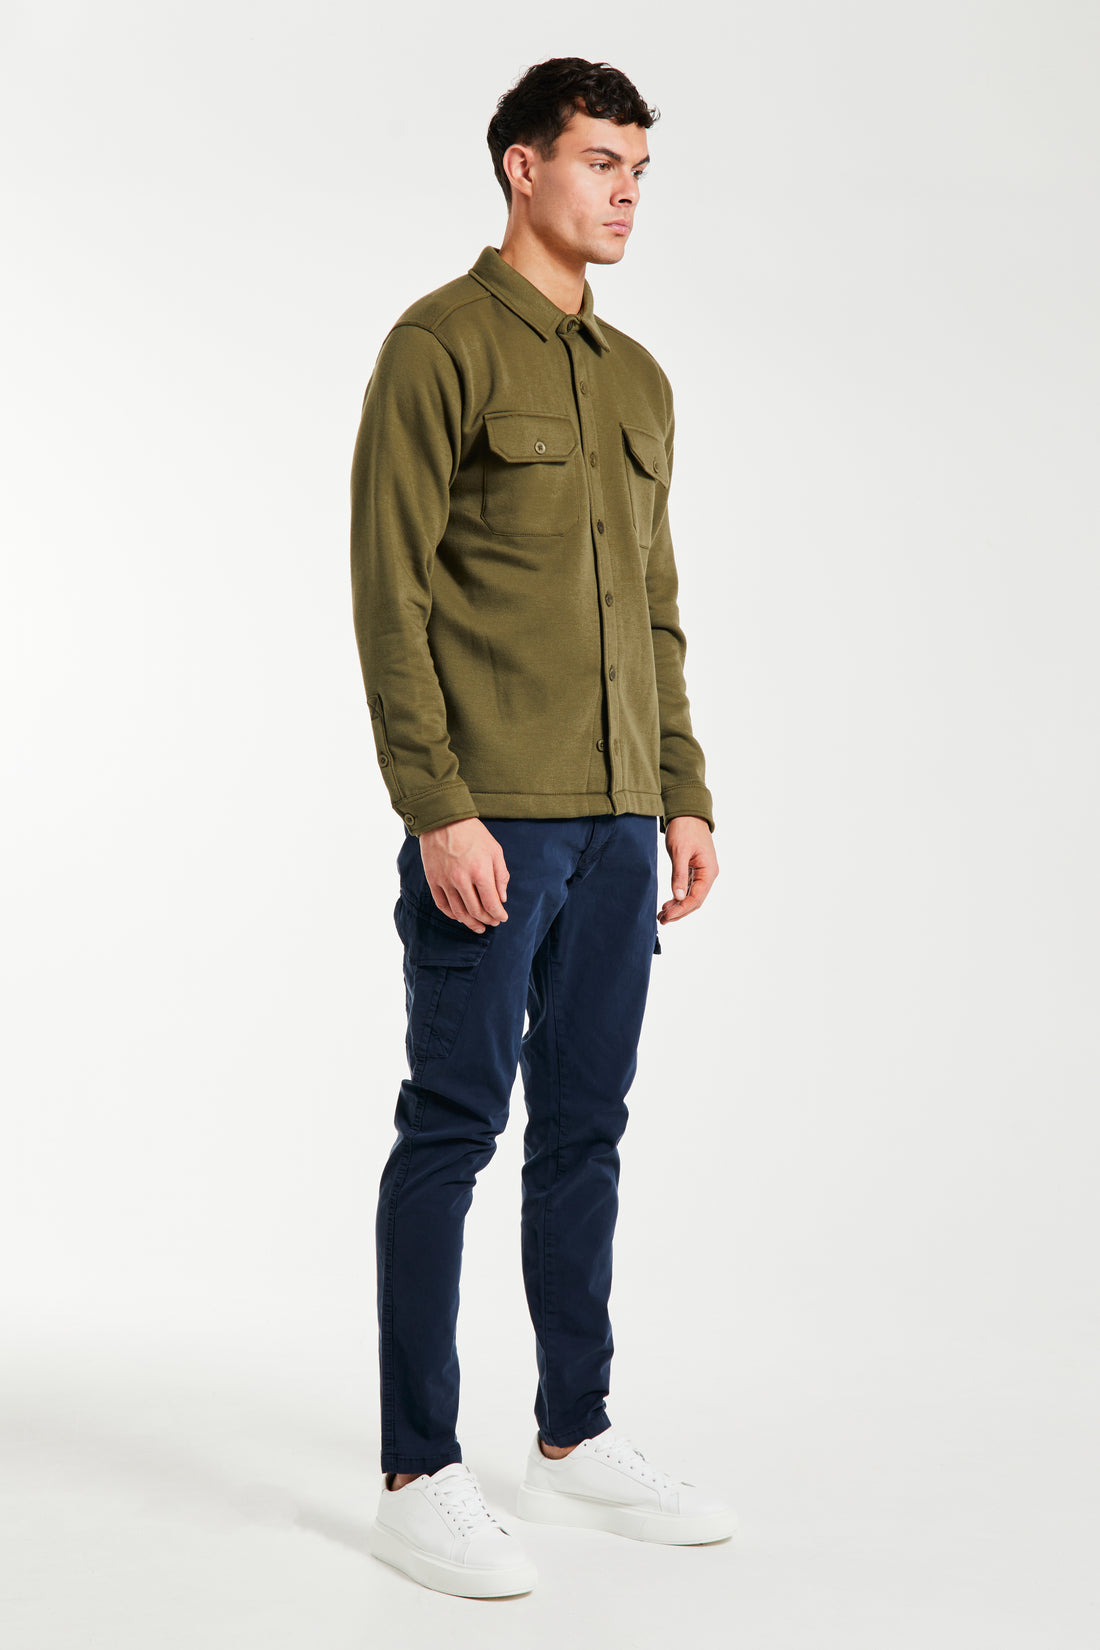 men's overshirt with cuffed sleeves in khaki green